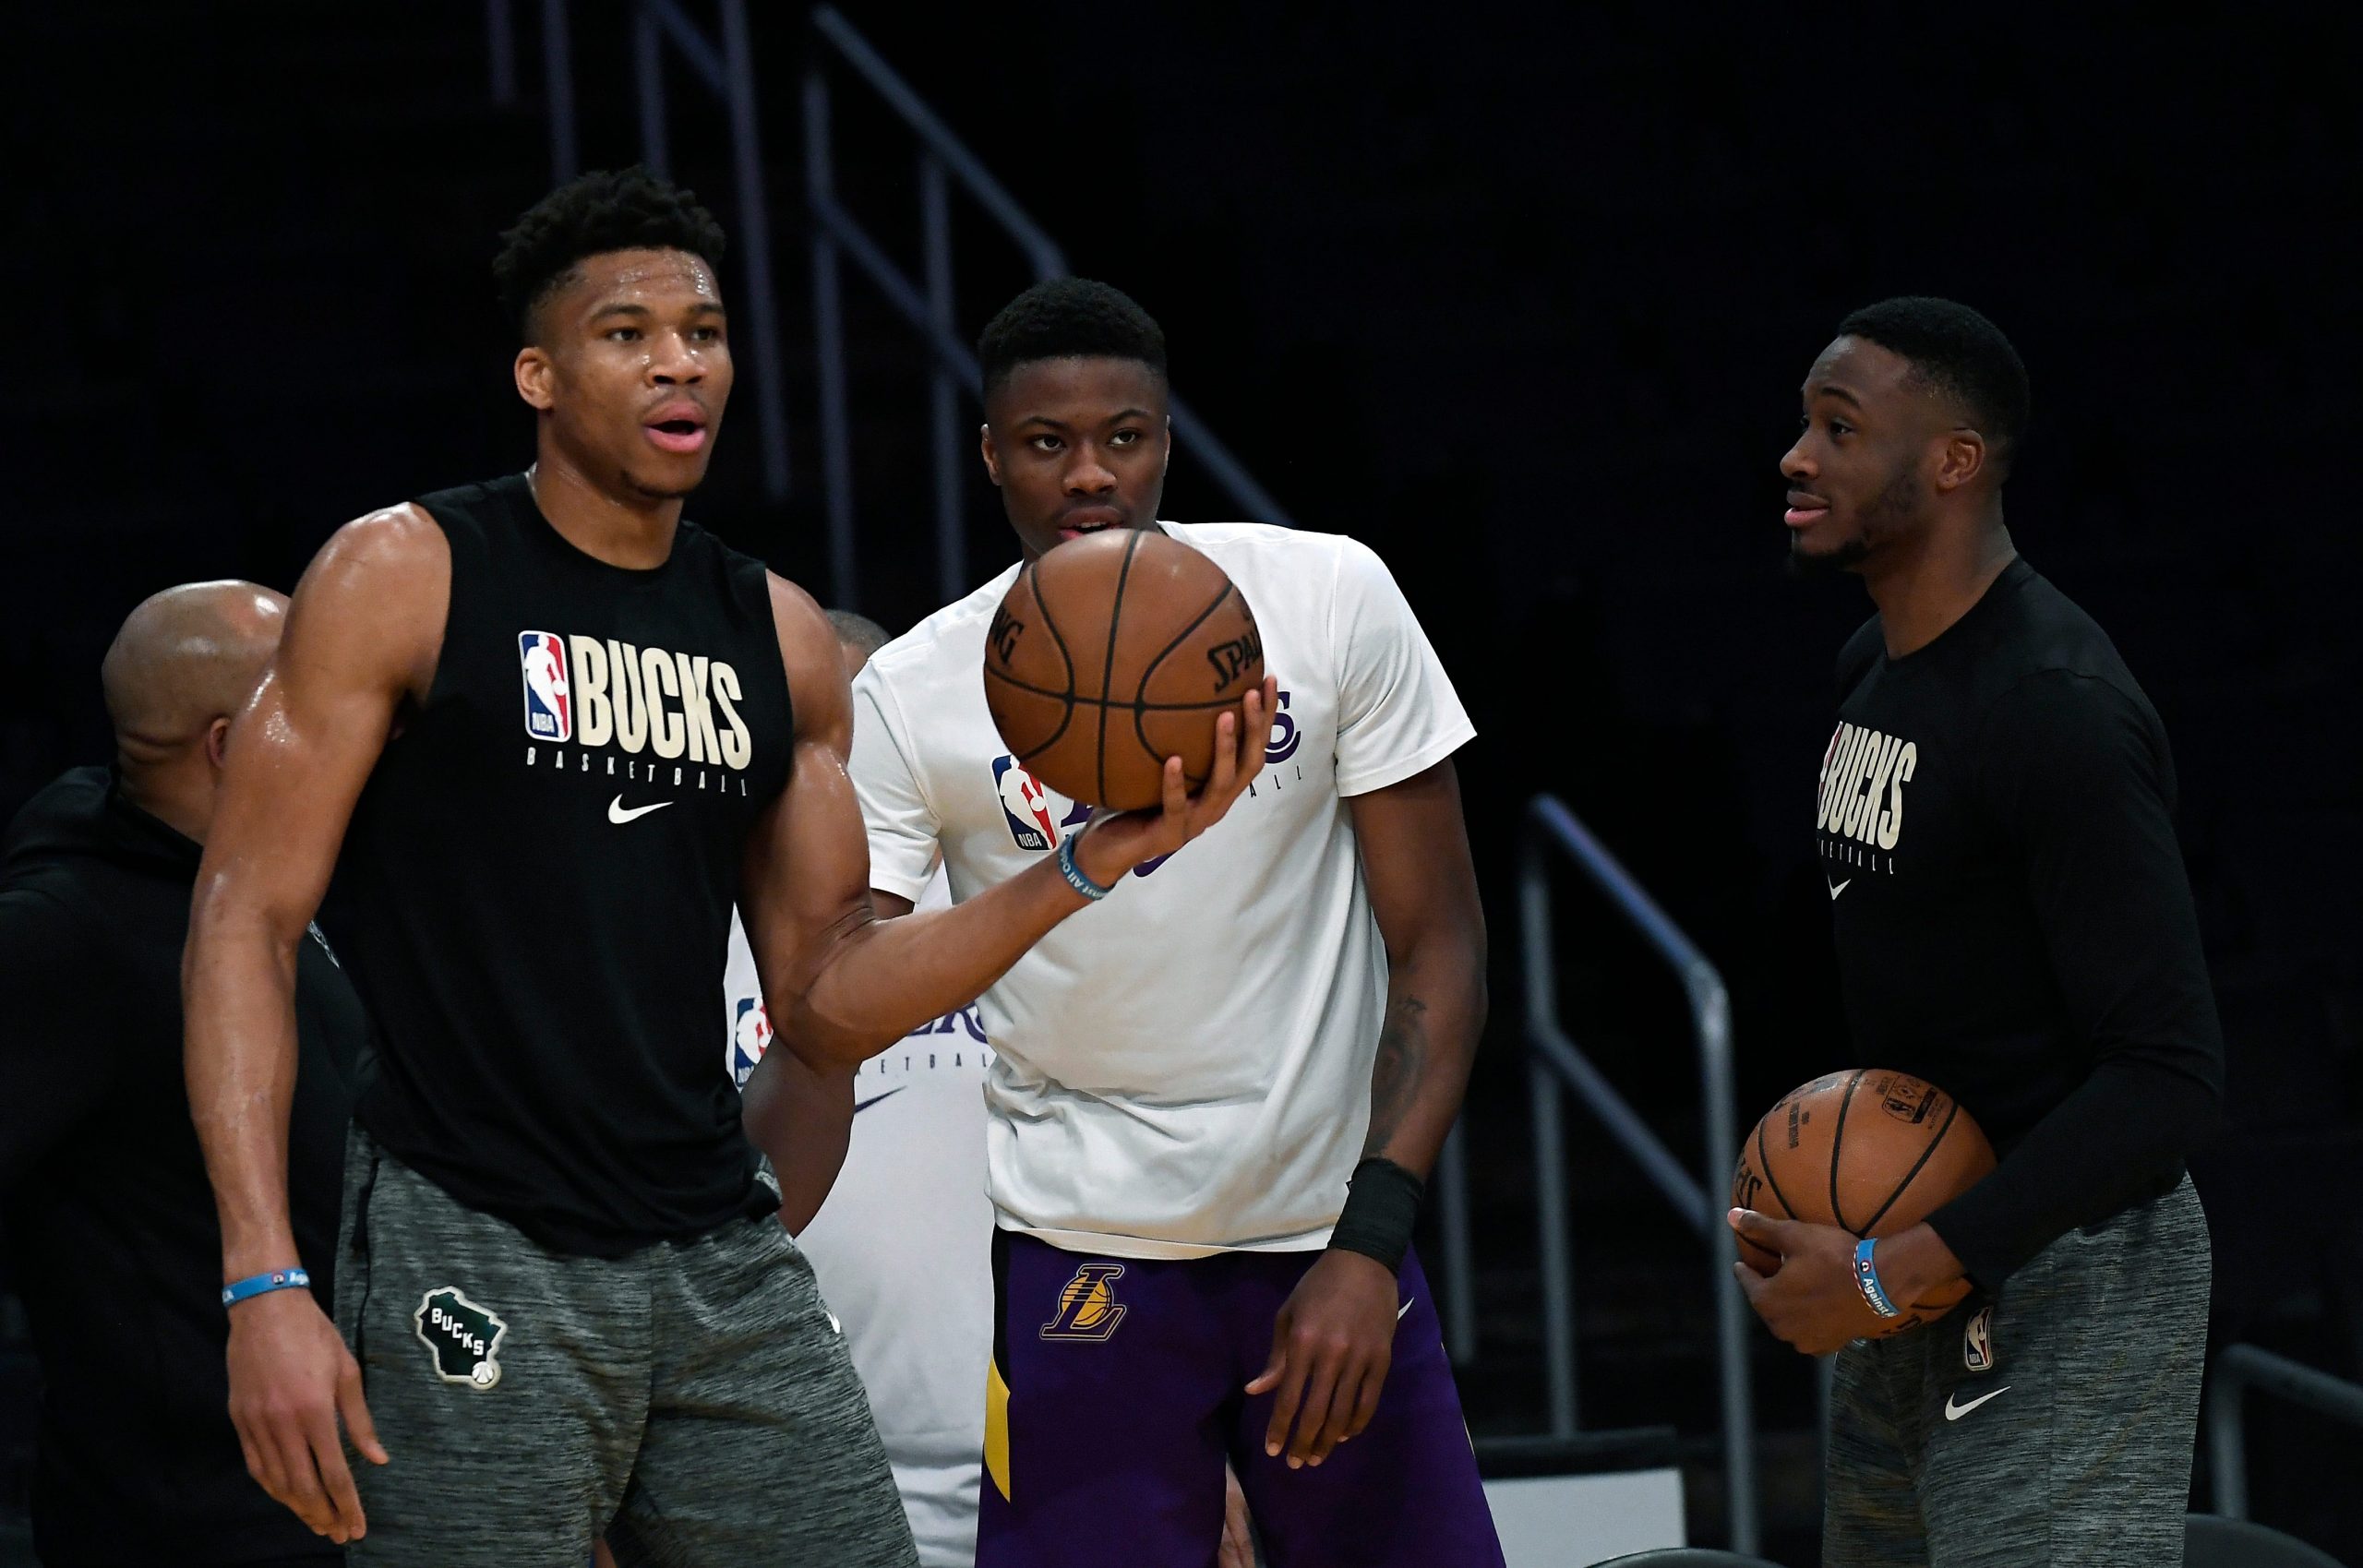 Giannis Antetokounmpo #34 of the Milwaukee Bucks gets together with and his brothers Kostas Antetokounmpo #37 of the Los Angeles Lakers and Thanasis Antetokounmpo #43 of the Milwaukee Bucks